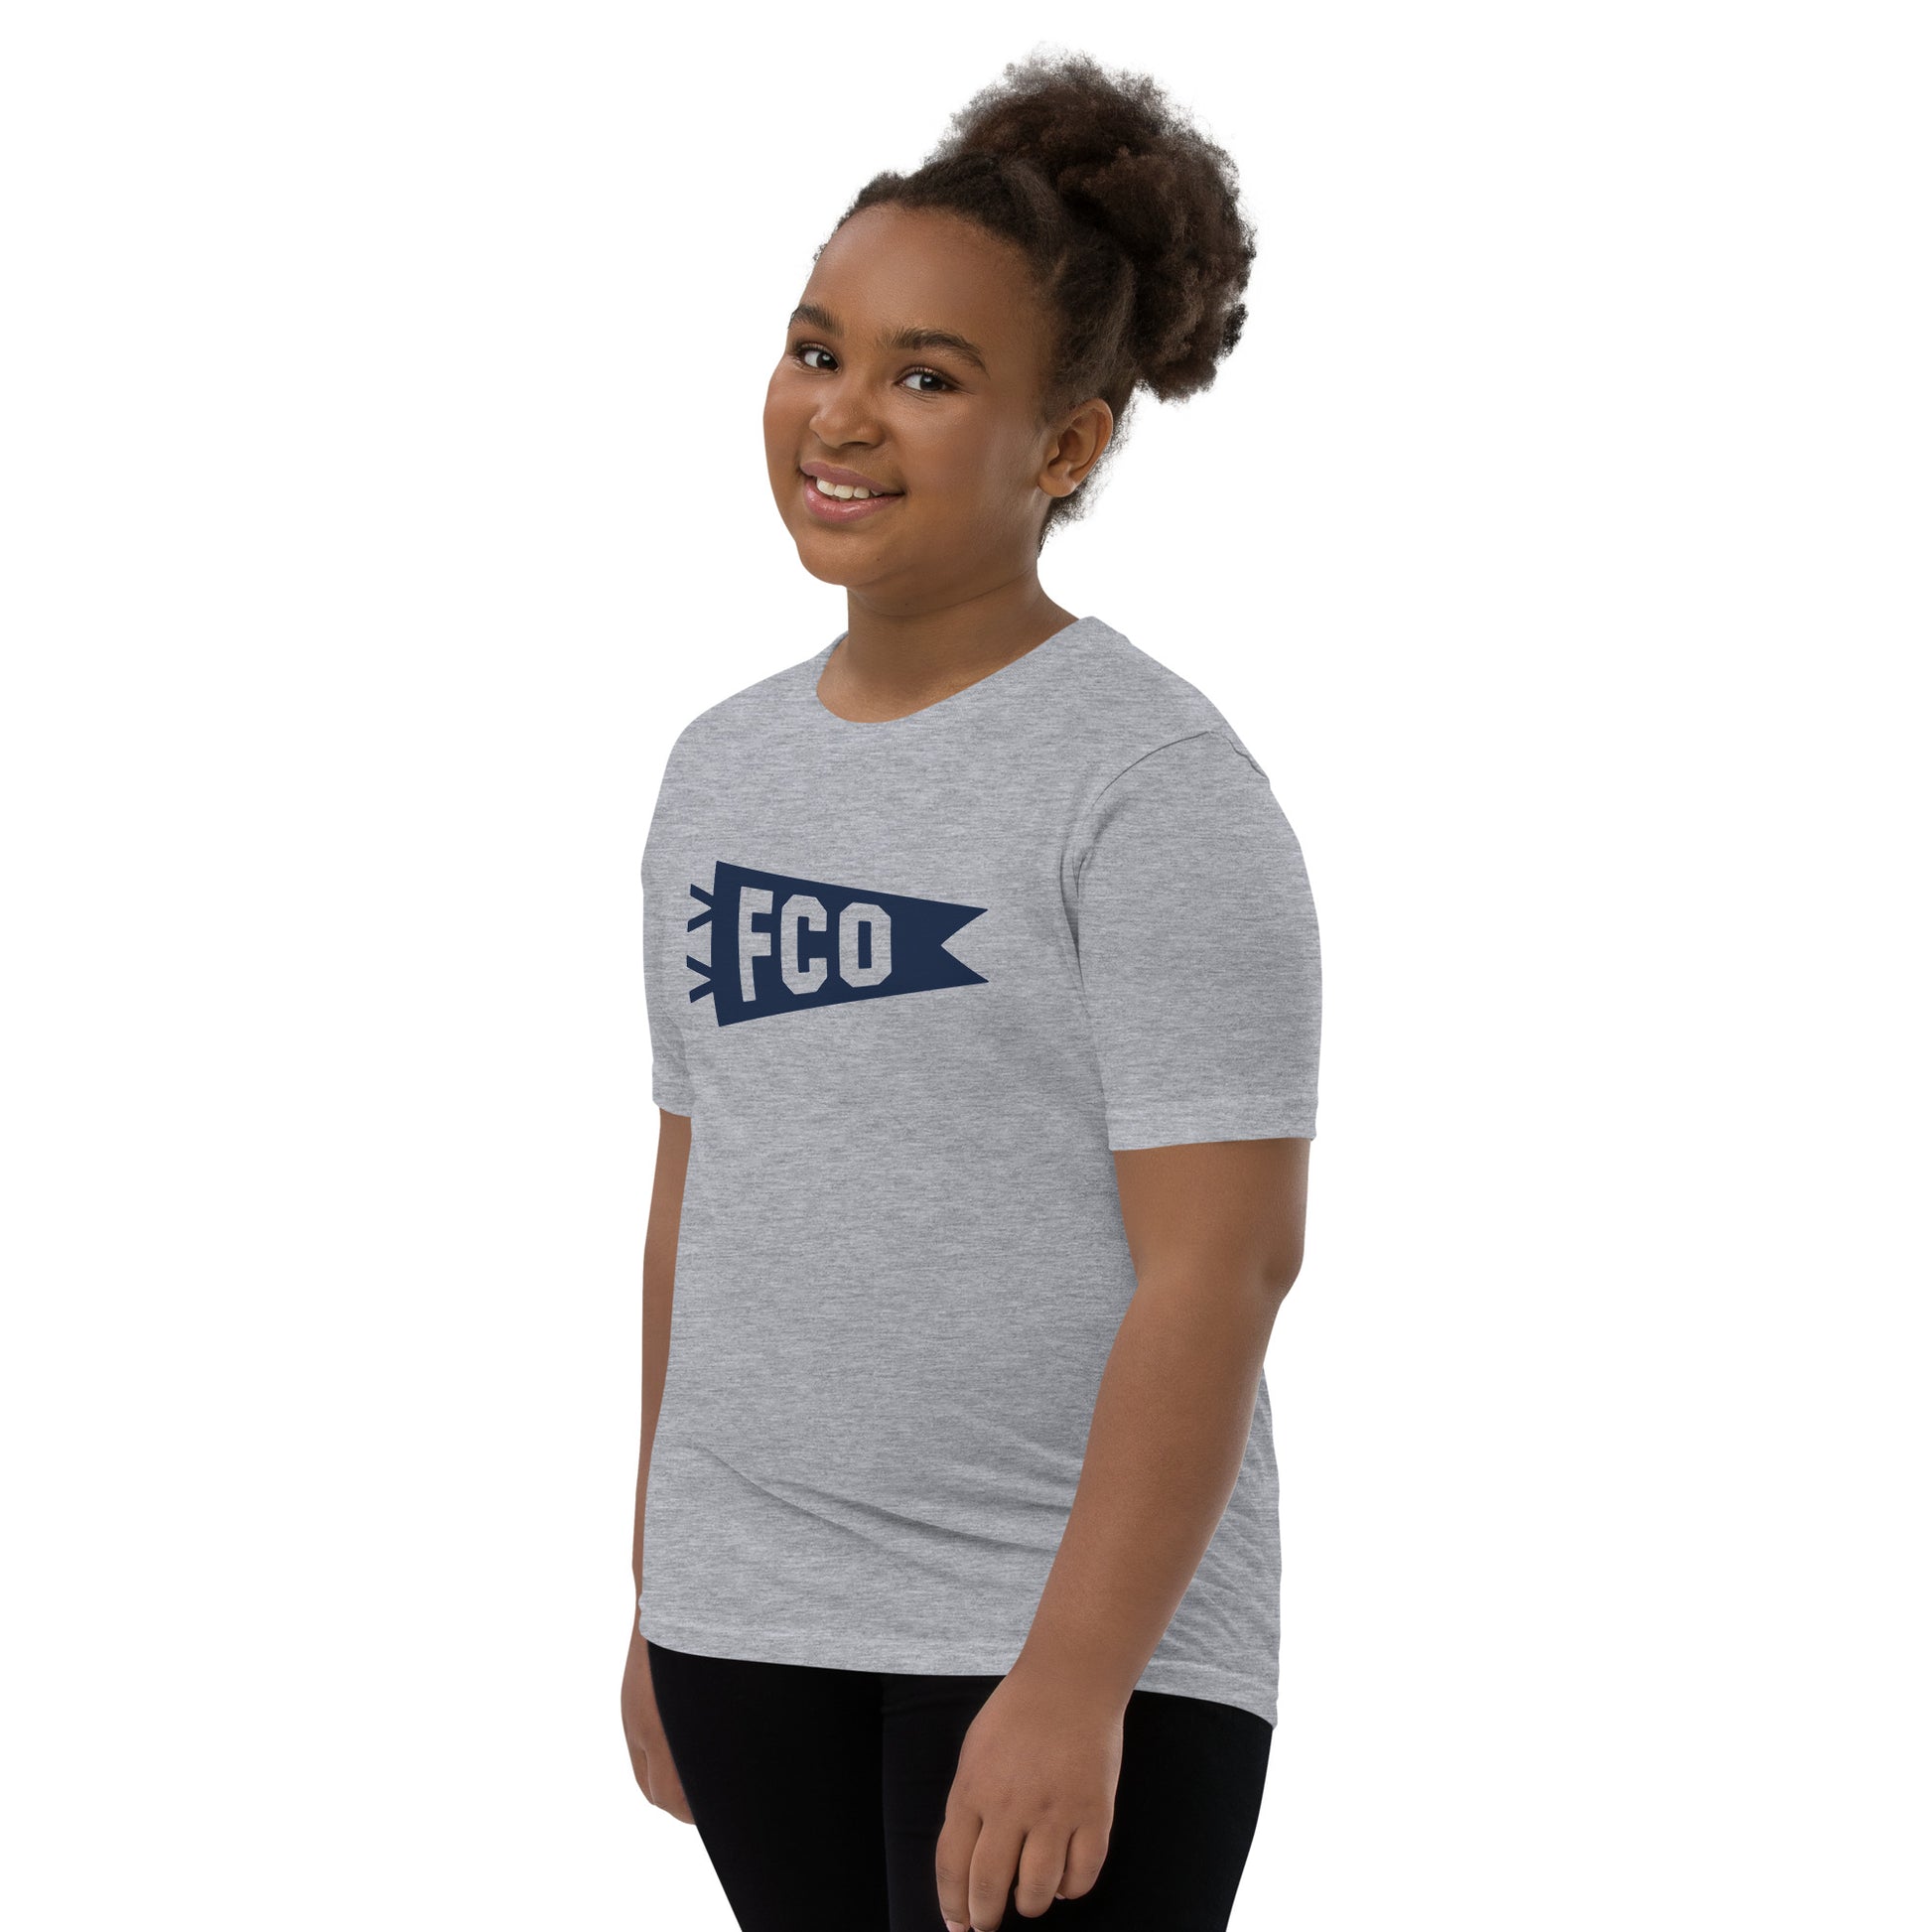 Kid's Airport Code Tee - Navy Blue Graphic • FCO Rome • YHM Designs - Image 04